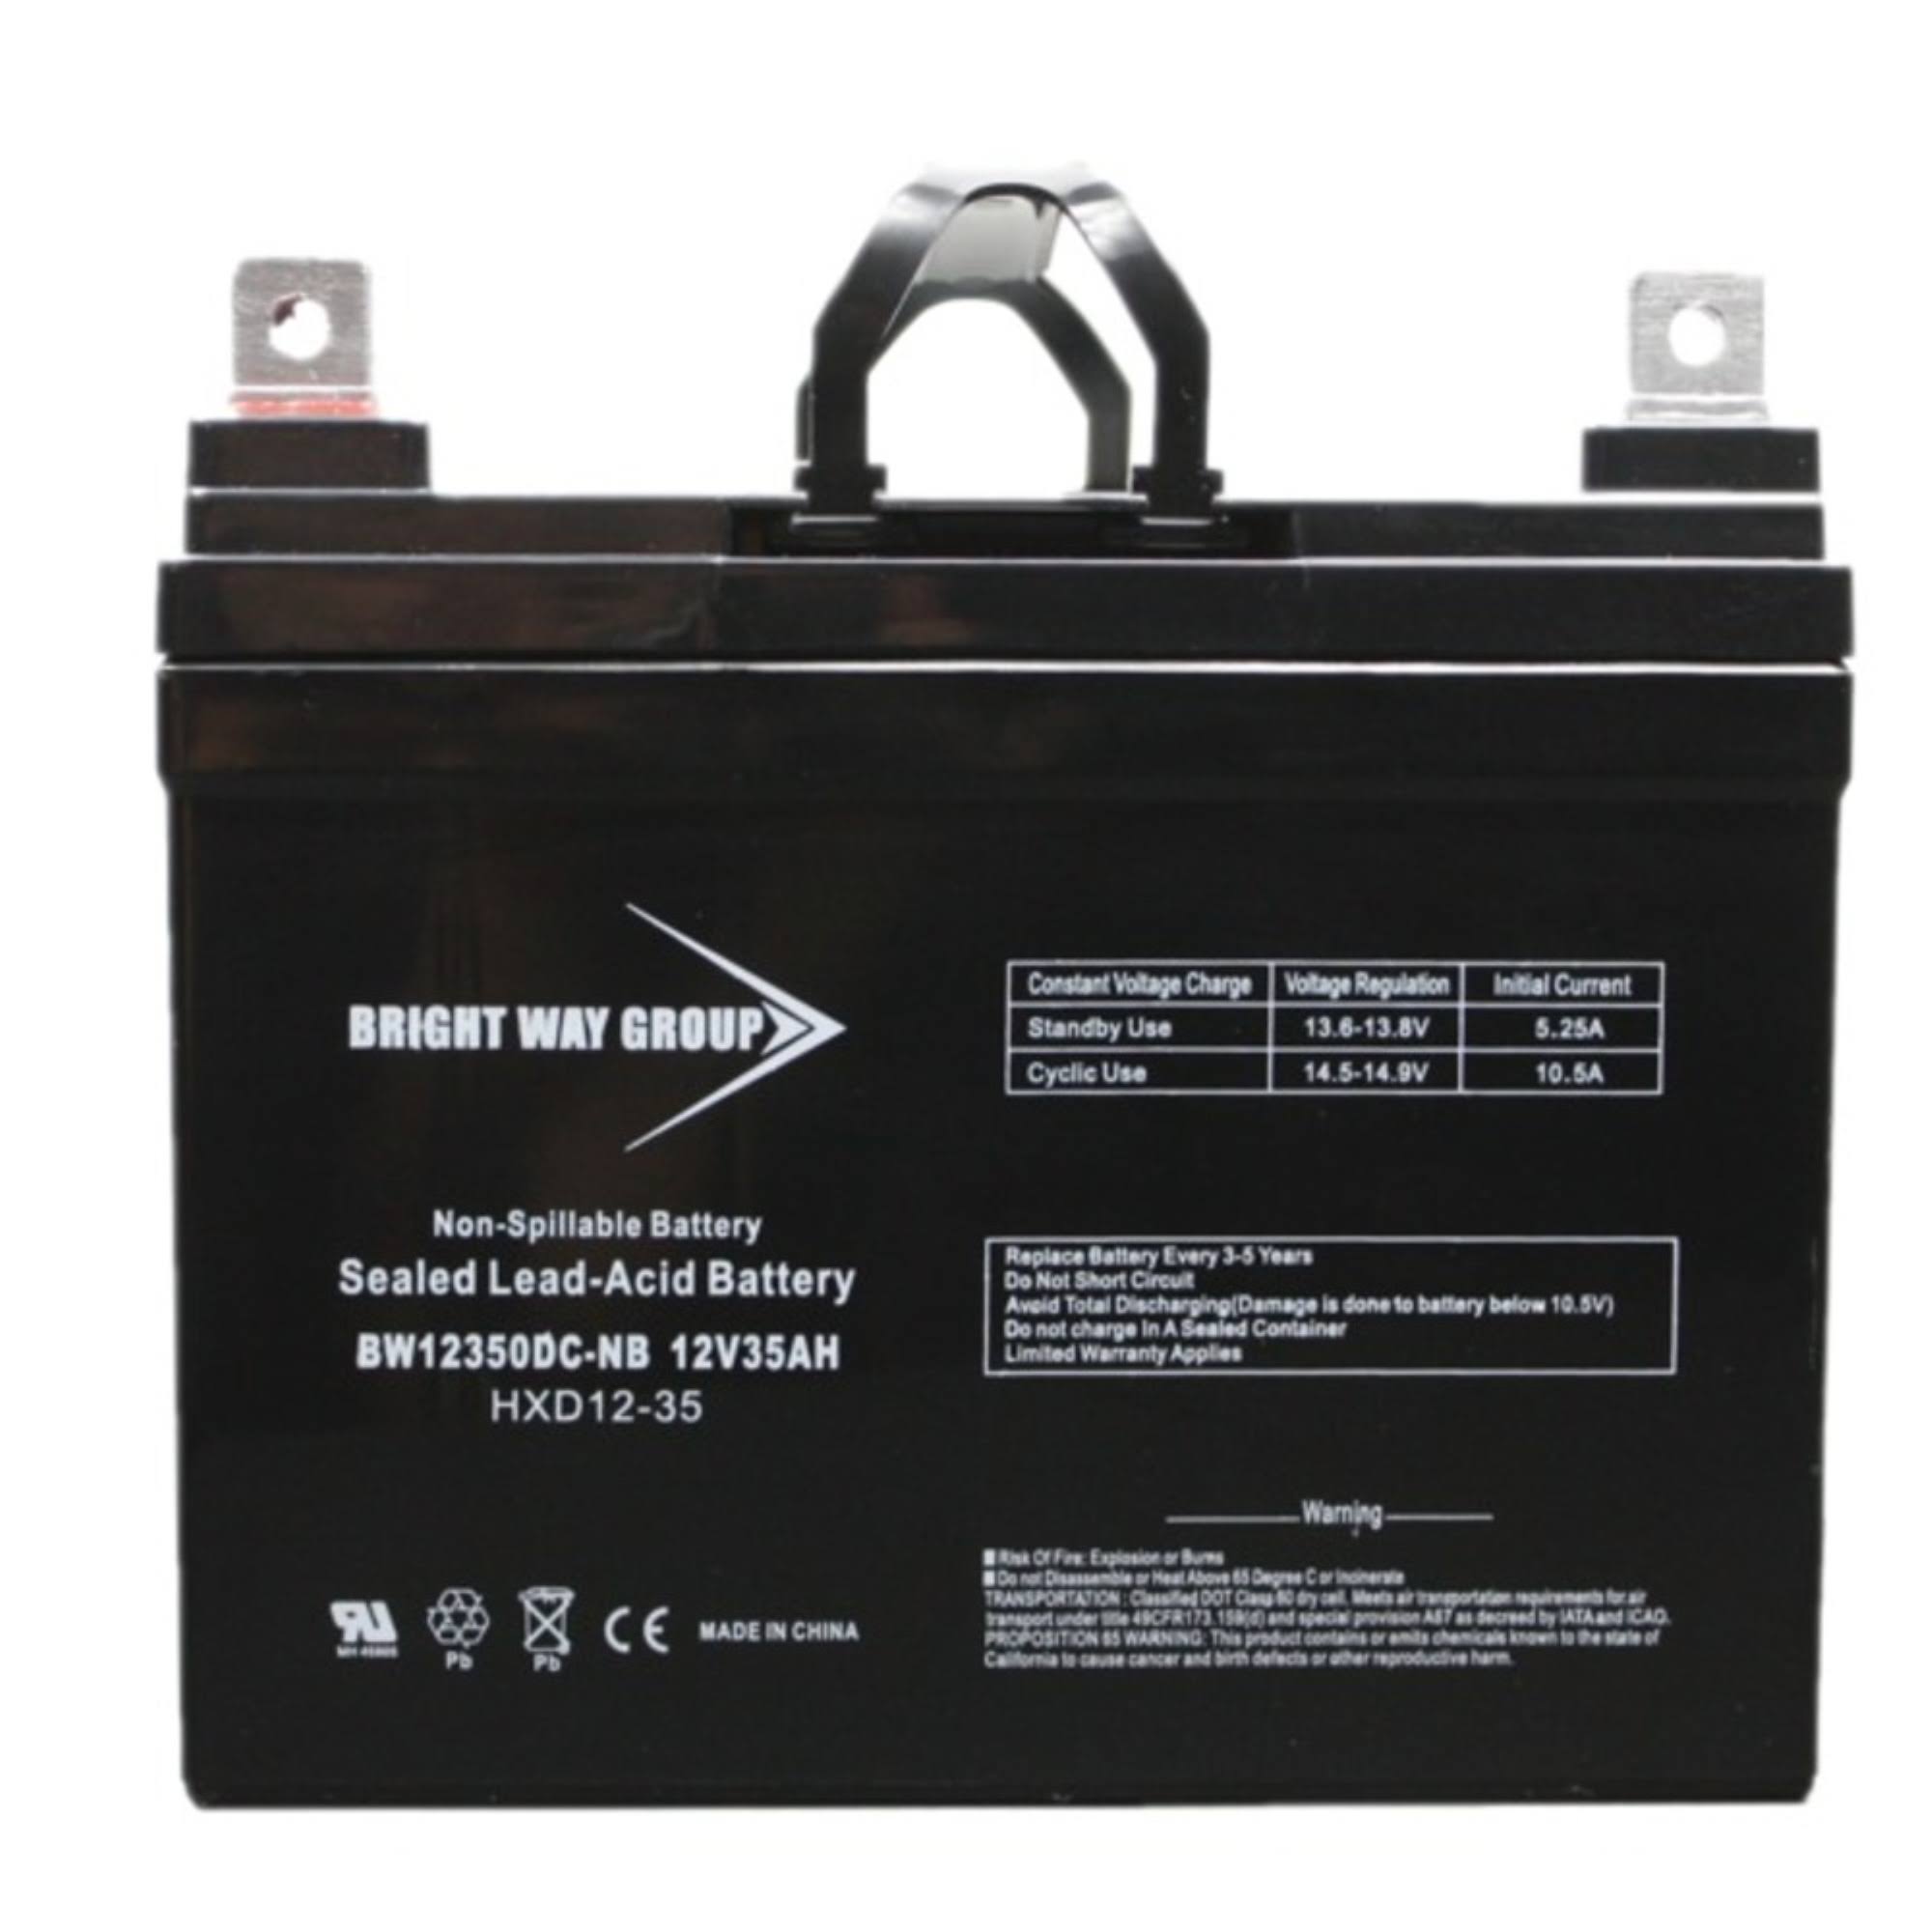 BWG 12350 NB Battery - Bright Way Group BW 12350 NB (0240)